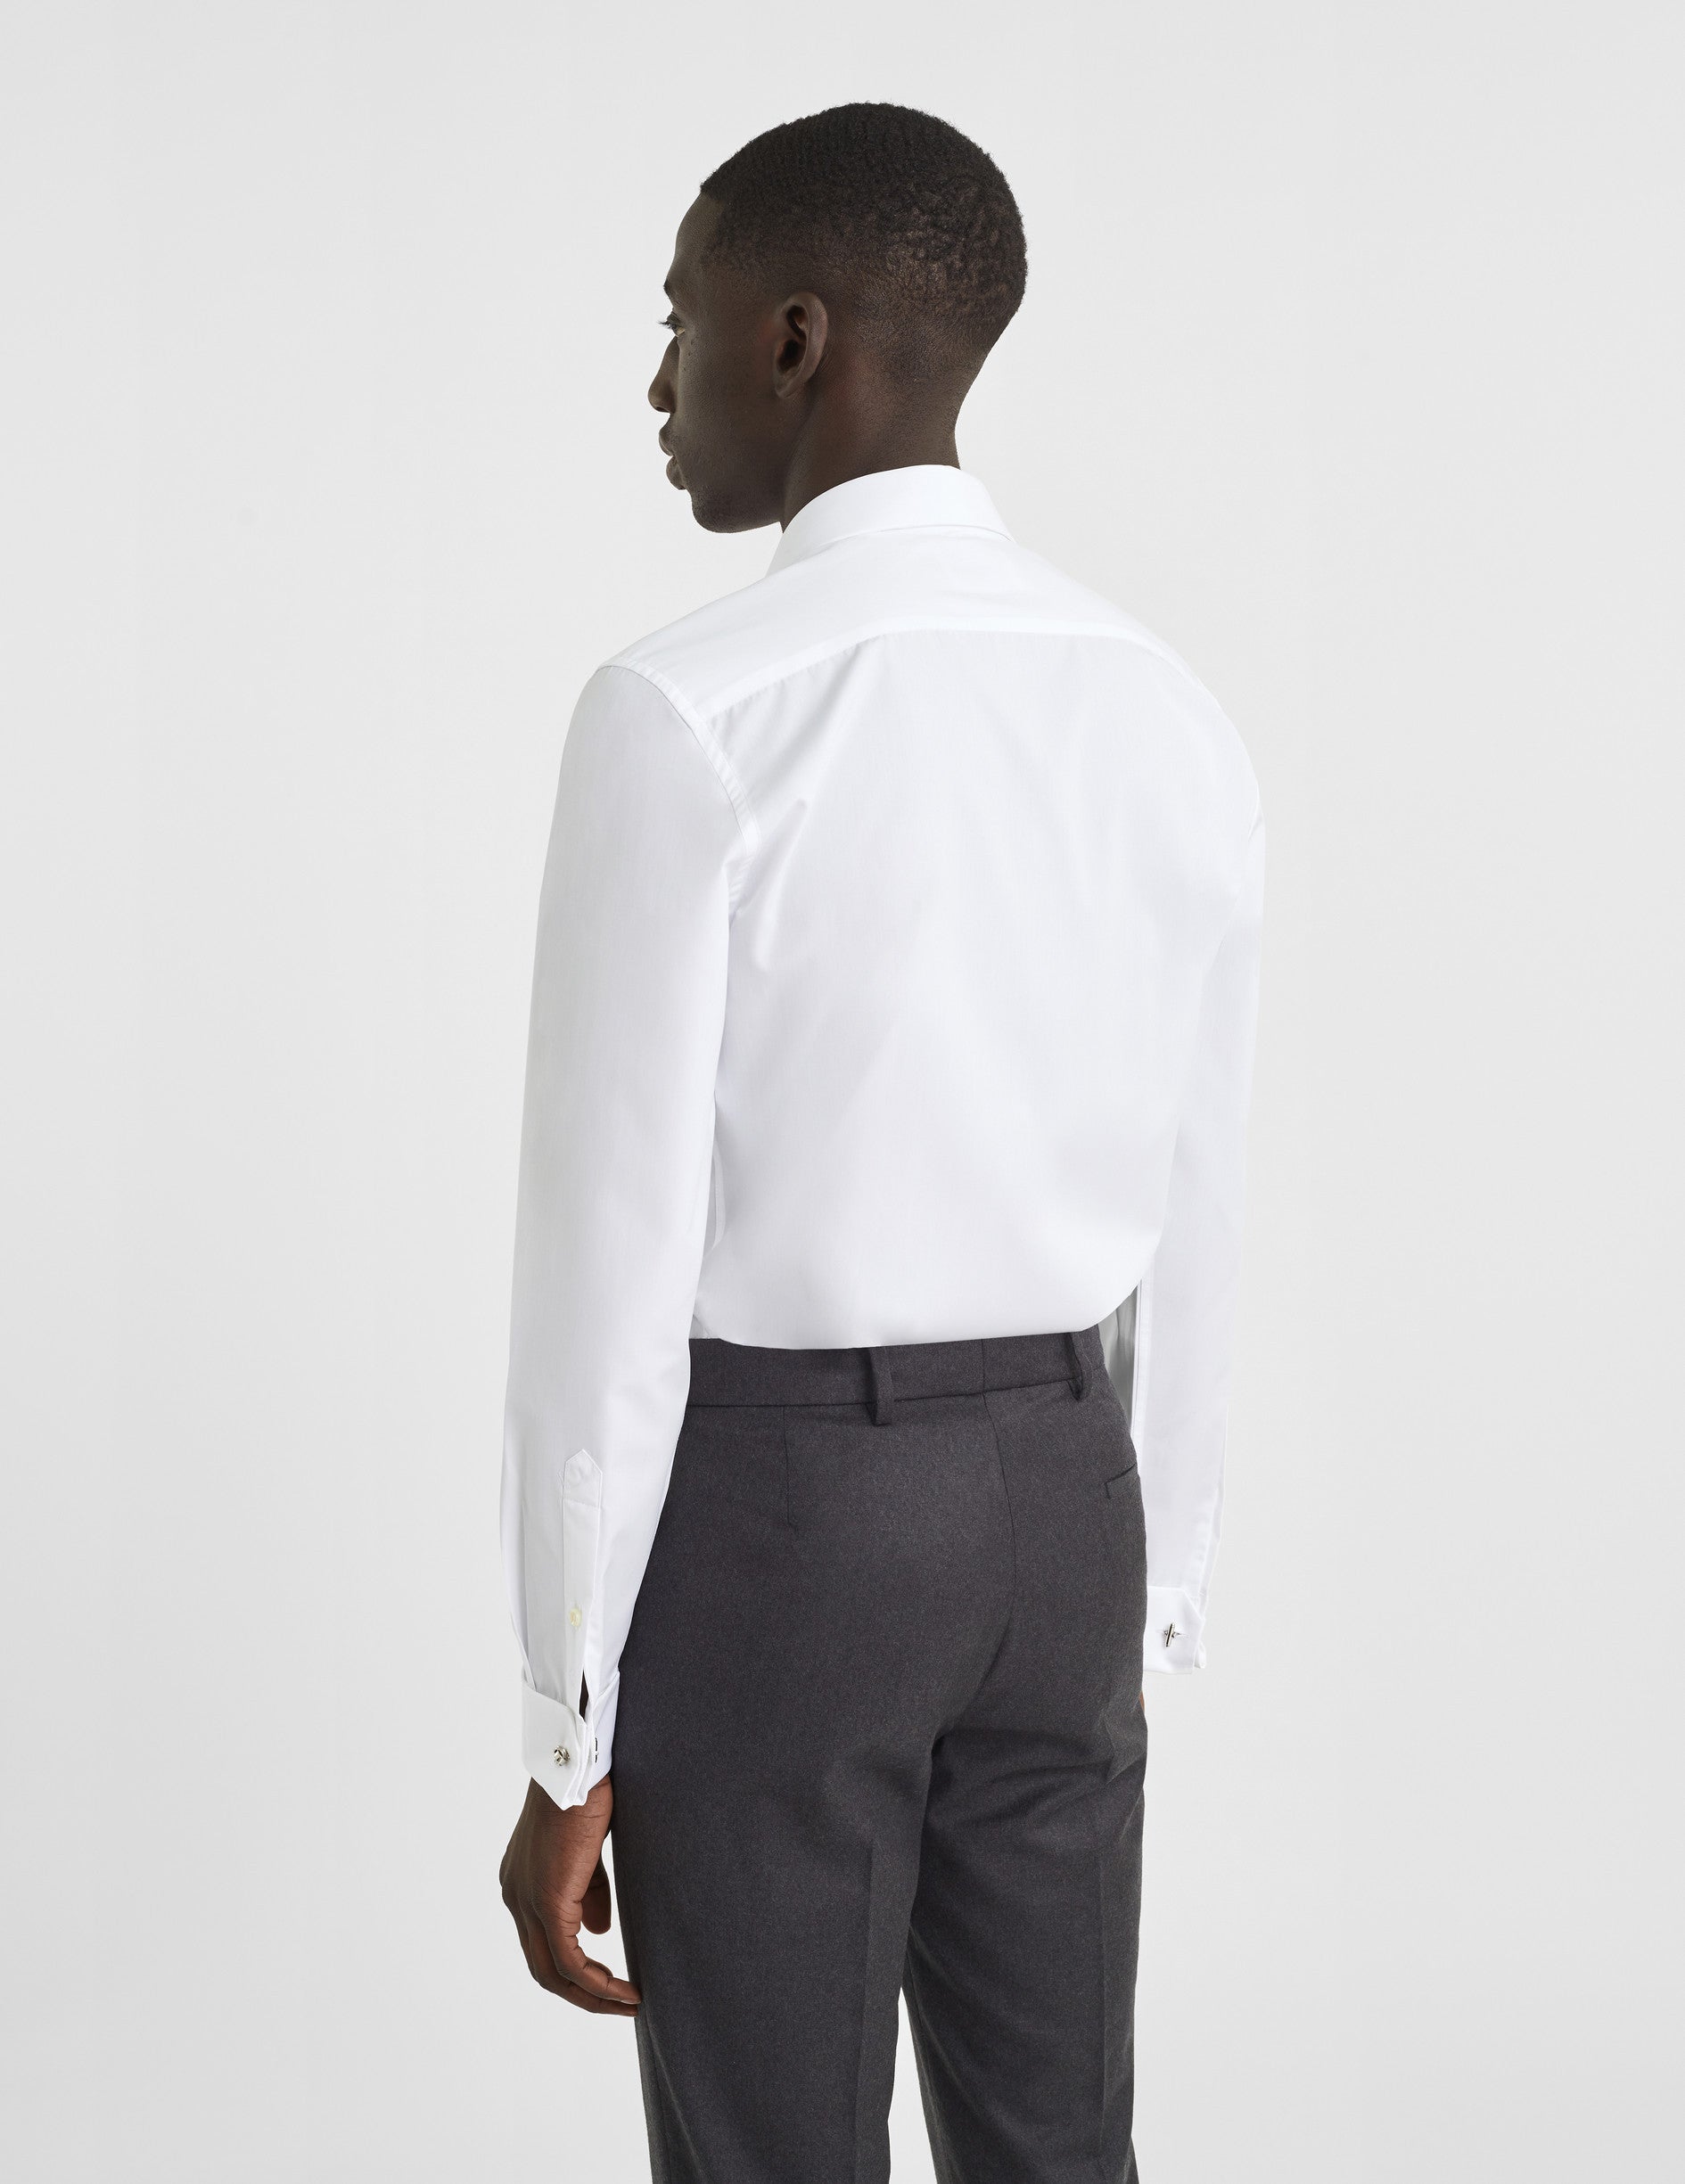 Fitted white shirt - Poplin - Italian Collar - Musketeers Cuffs